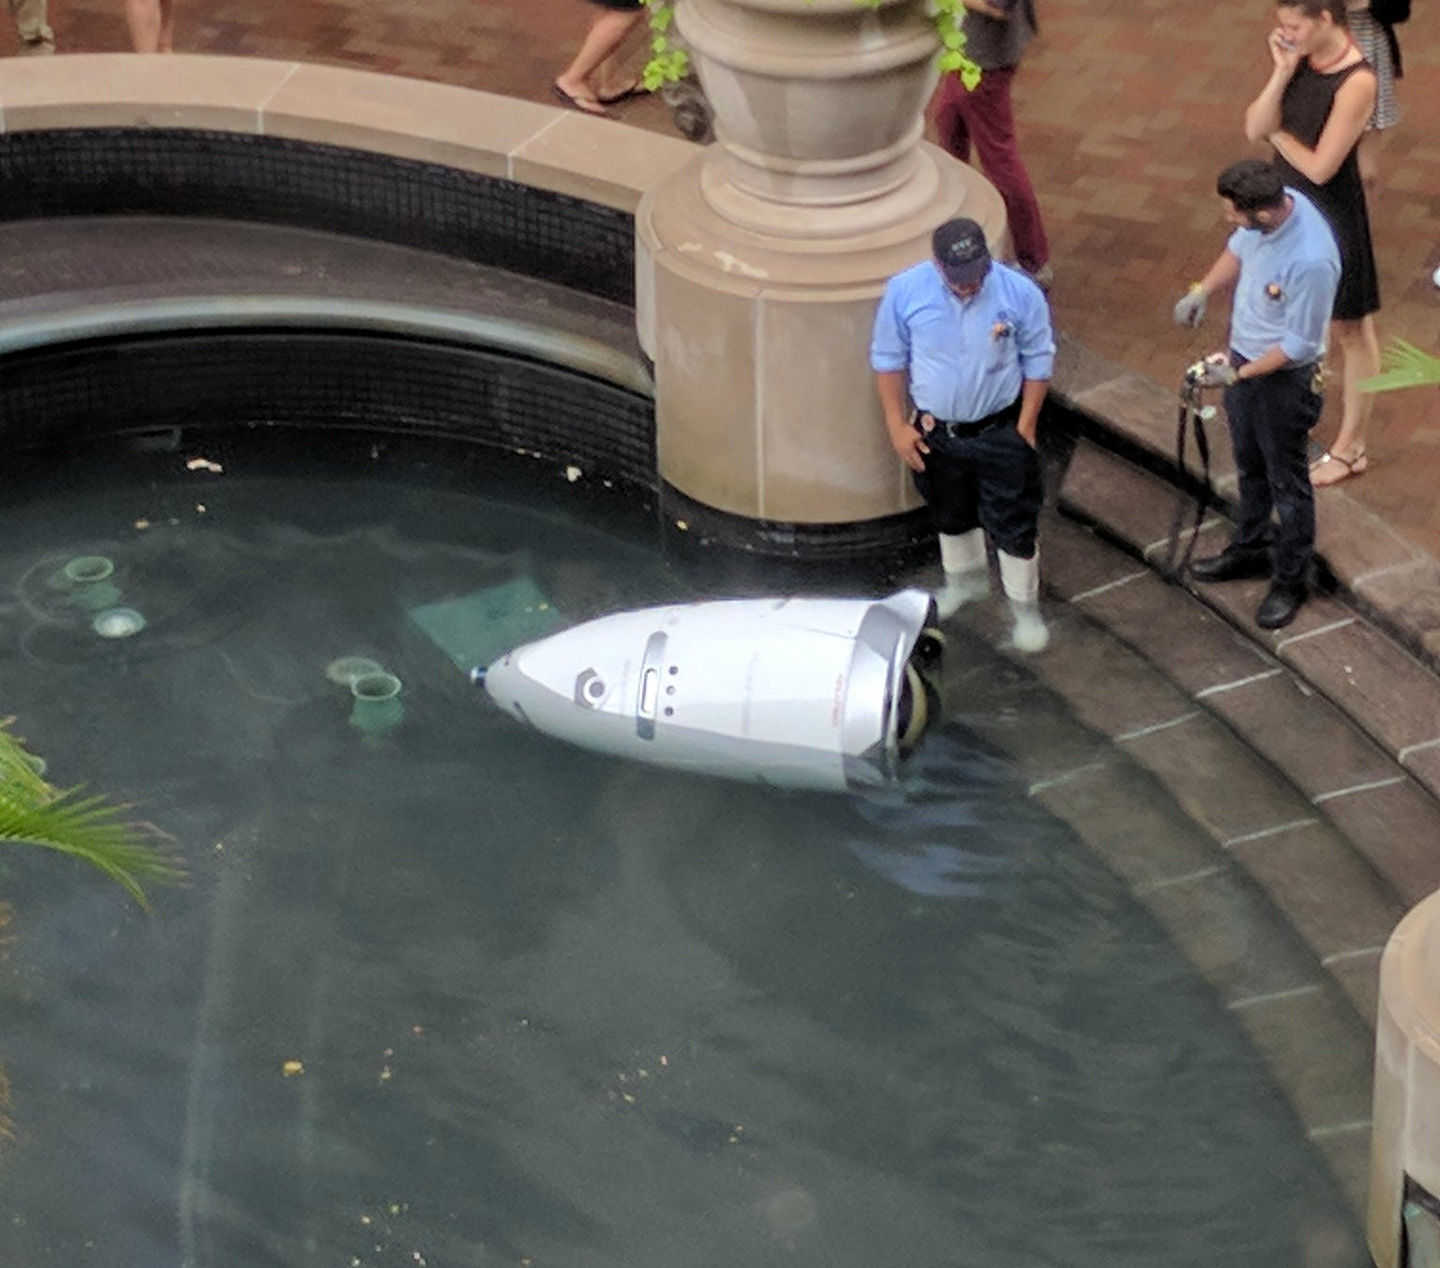 The K5 security guard robot "drowned" in a DC fountain. (Bilal Farooqui/ Twitter)